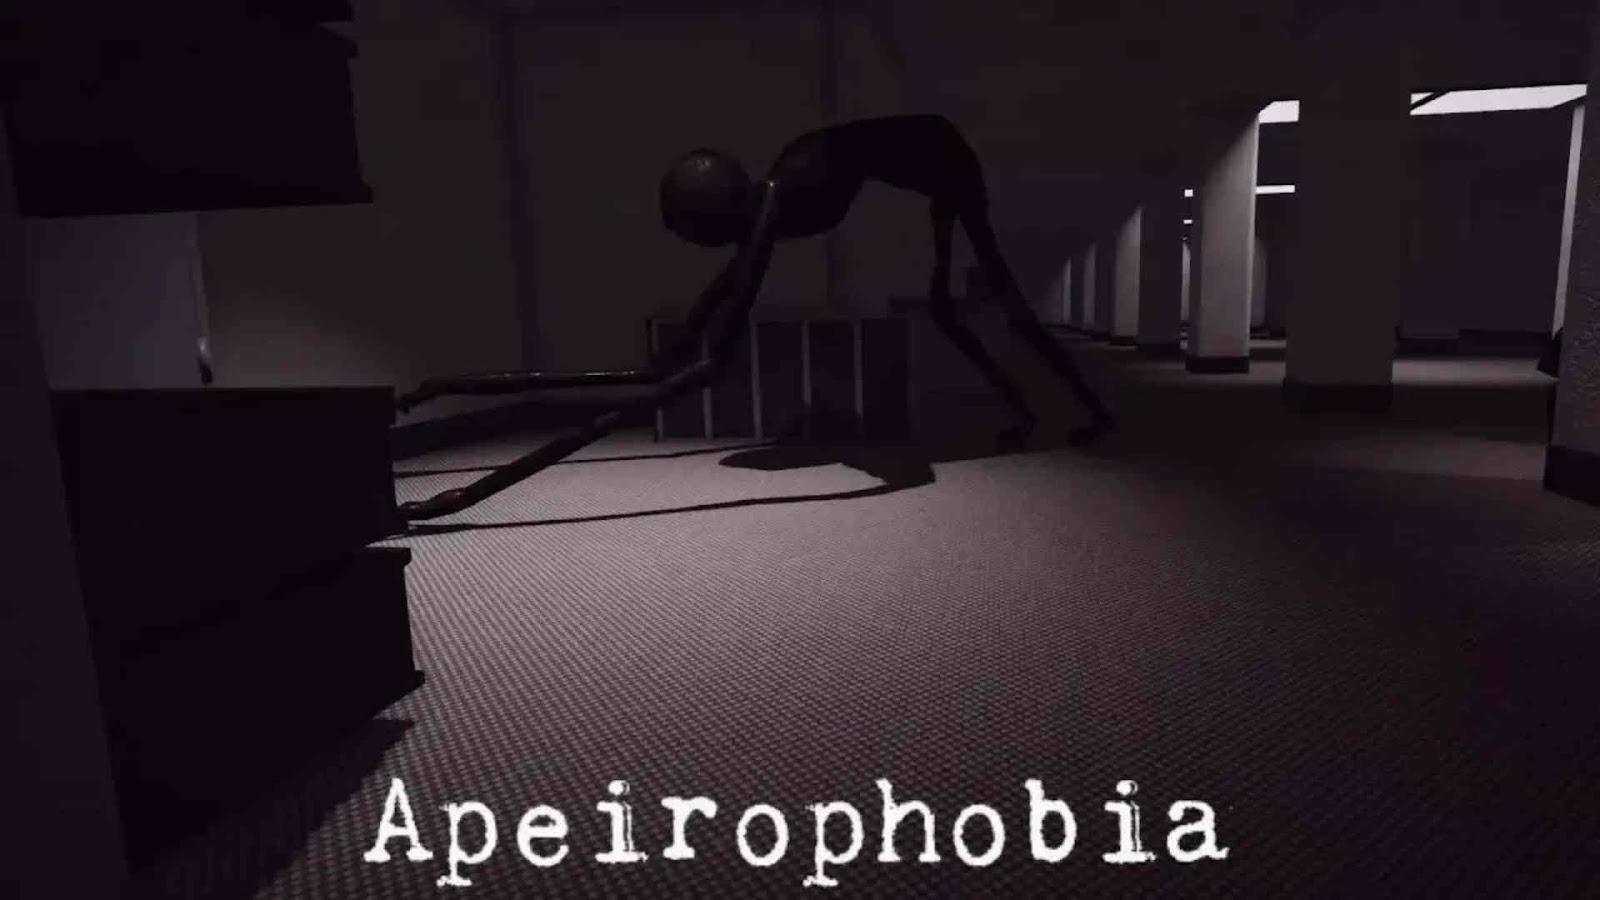 What is Apeirophobia on Roblox? - Try Hard Guides